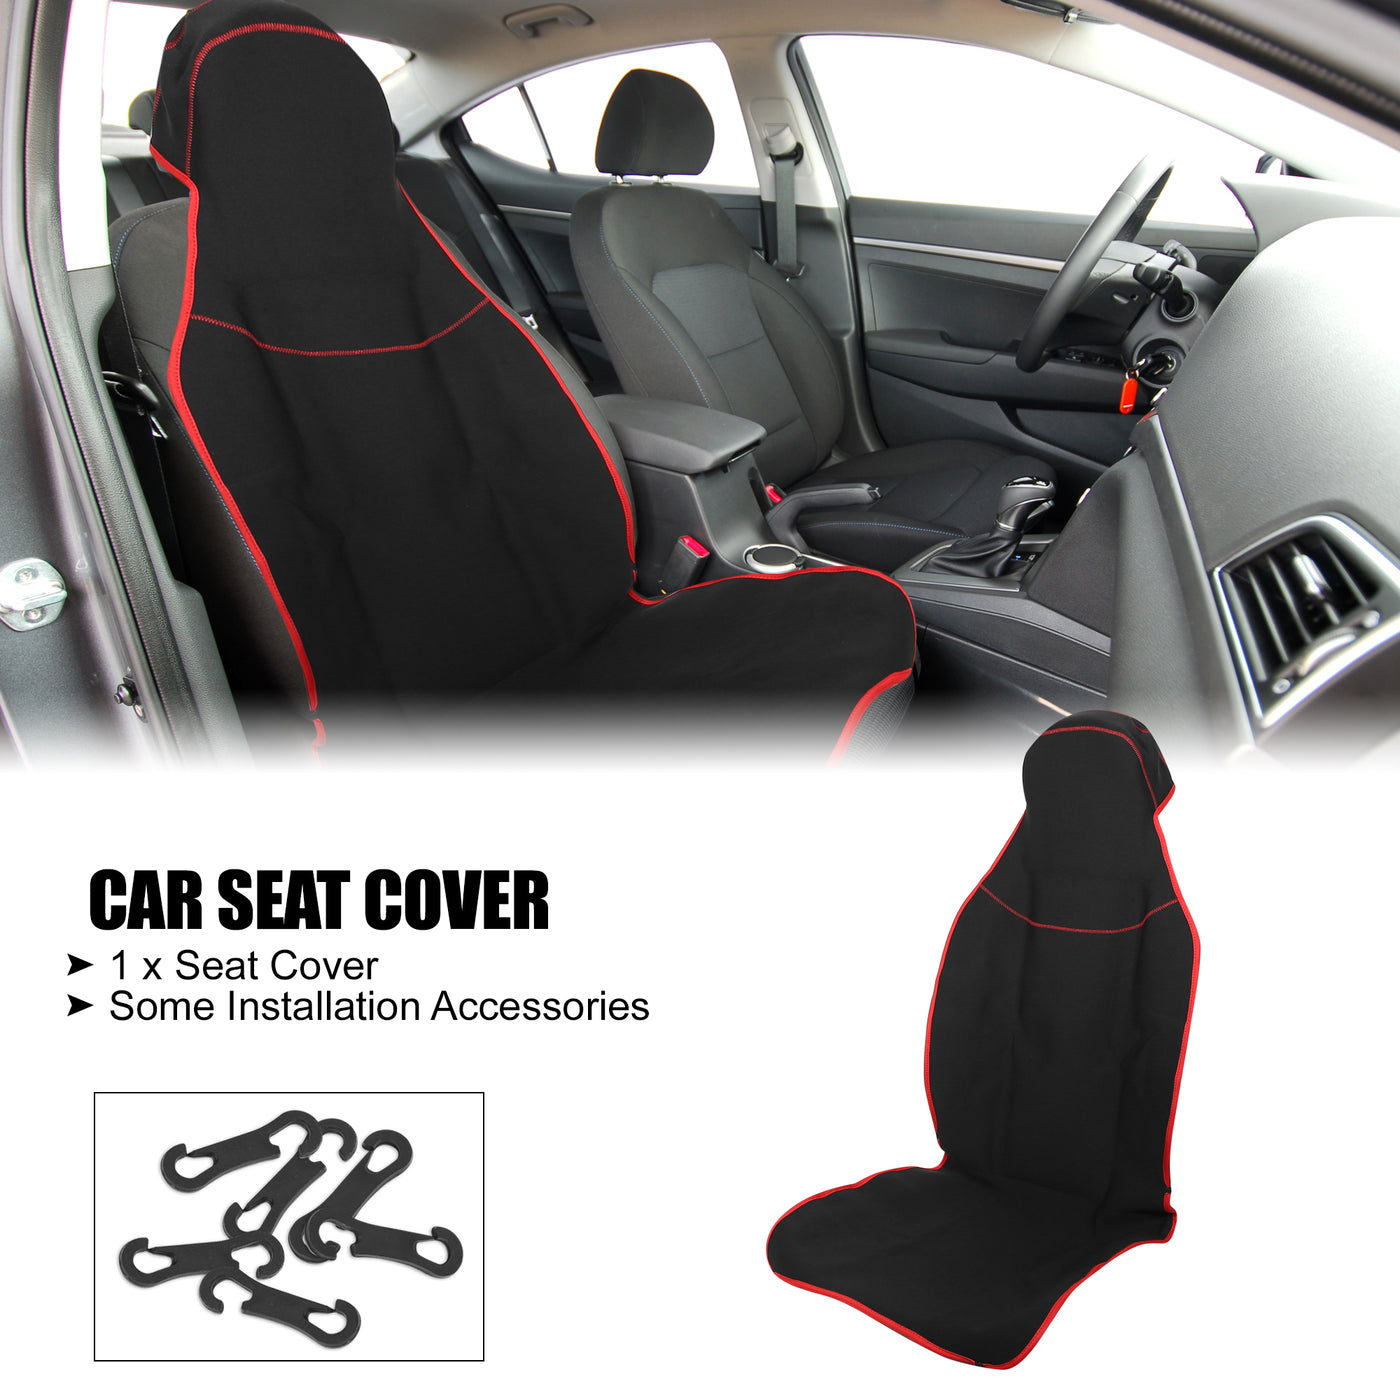 X AUTOHAUX Universal Interior Car Seat Covers Durable Washable Flat Padding Neoprene Car Seat Covers Fit for Cars Trucks and SUVs Red